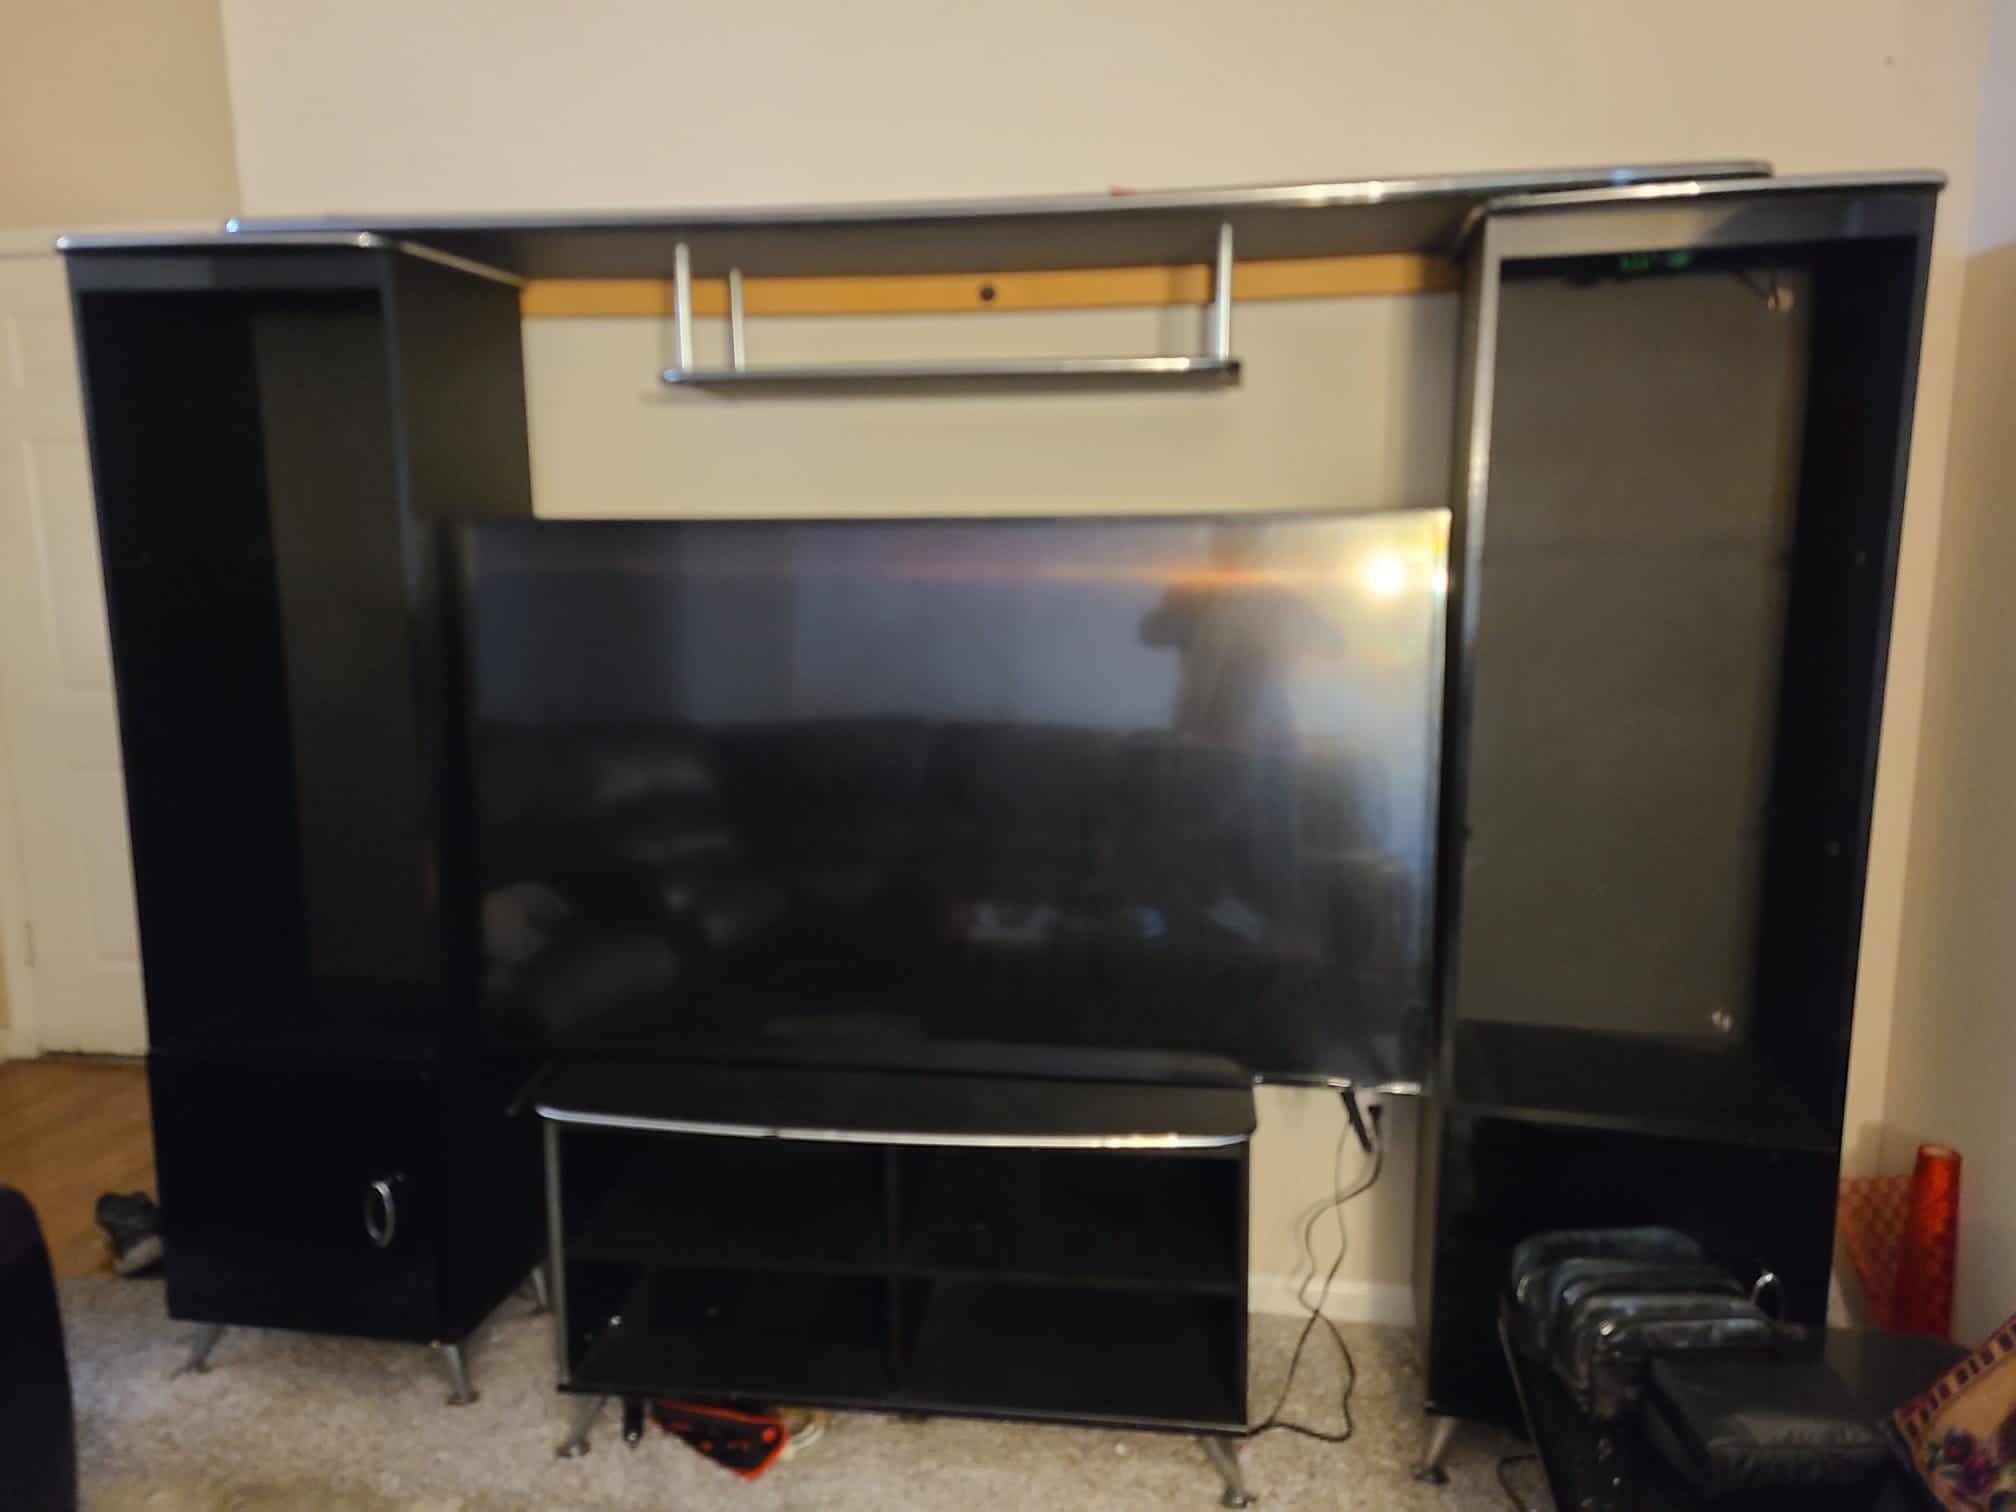 Media console For Sale - TV Not Included